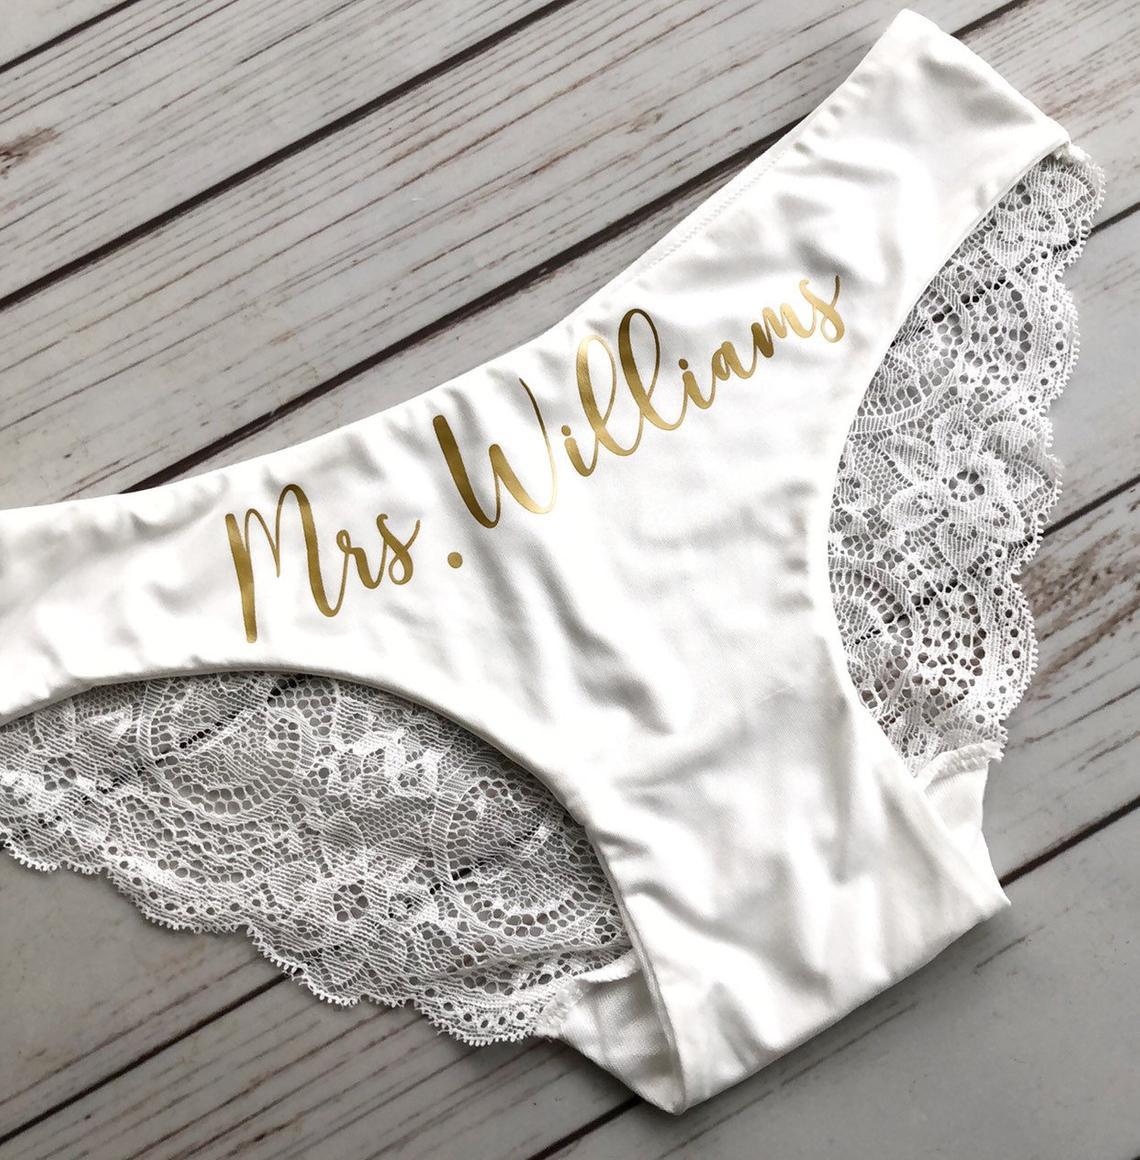 23 Bachelorette Party Gift Ideas Your Bestie Will Love